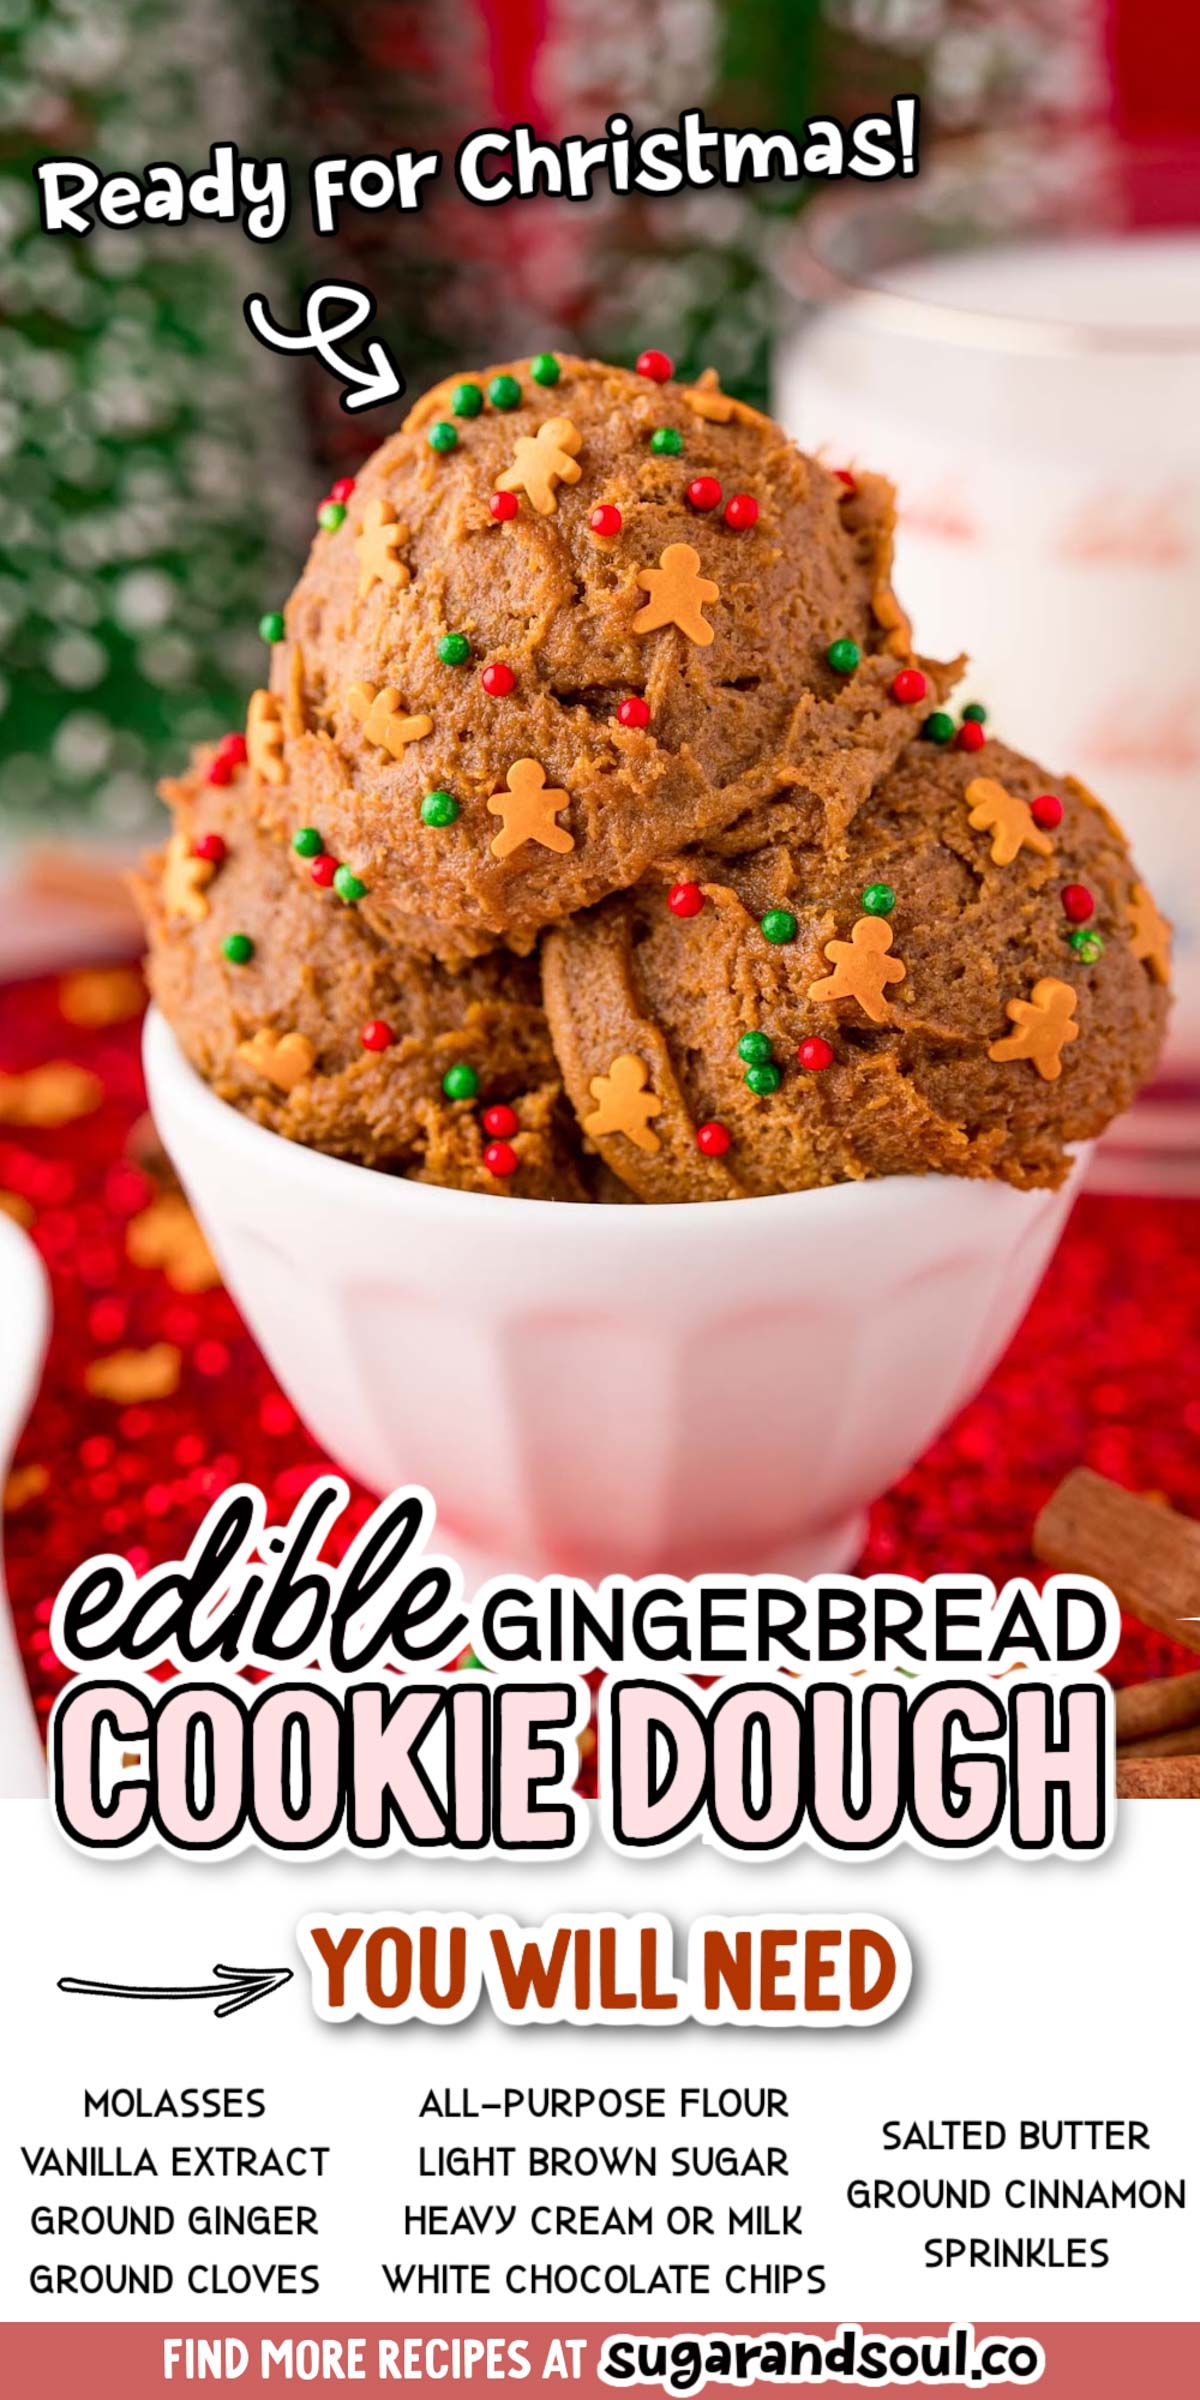 Edible Gingerbread Cookie Dough combines spices with molasses and other pantry staple ingredients for a sweet treat that's safe to eat! Ready to lick off the spatula in only 5 minutes! via @sugarandsoulco